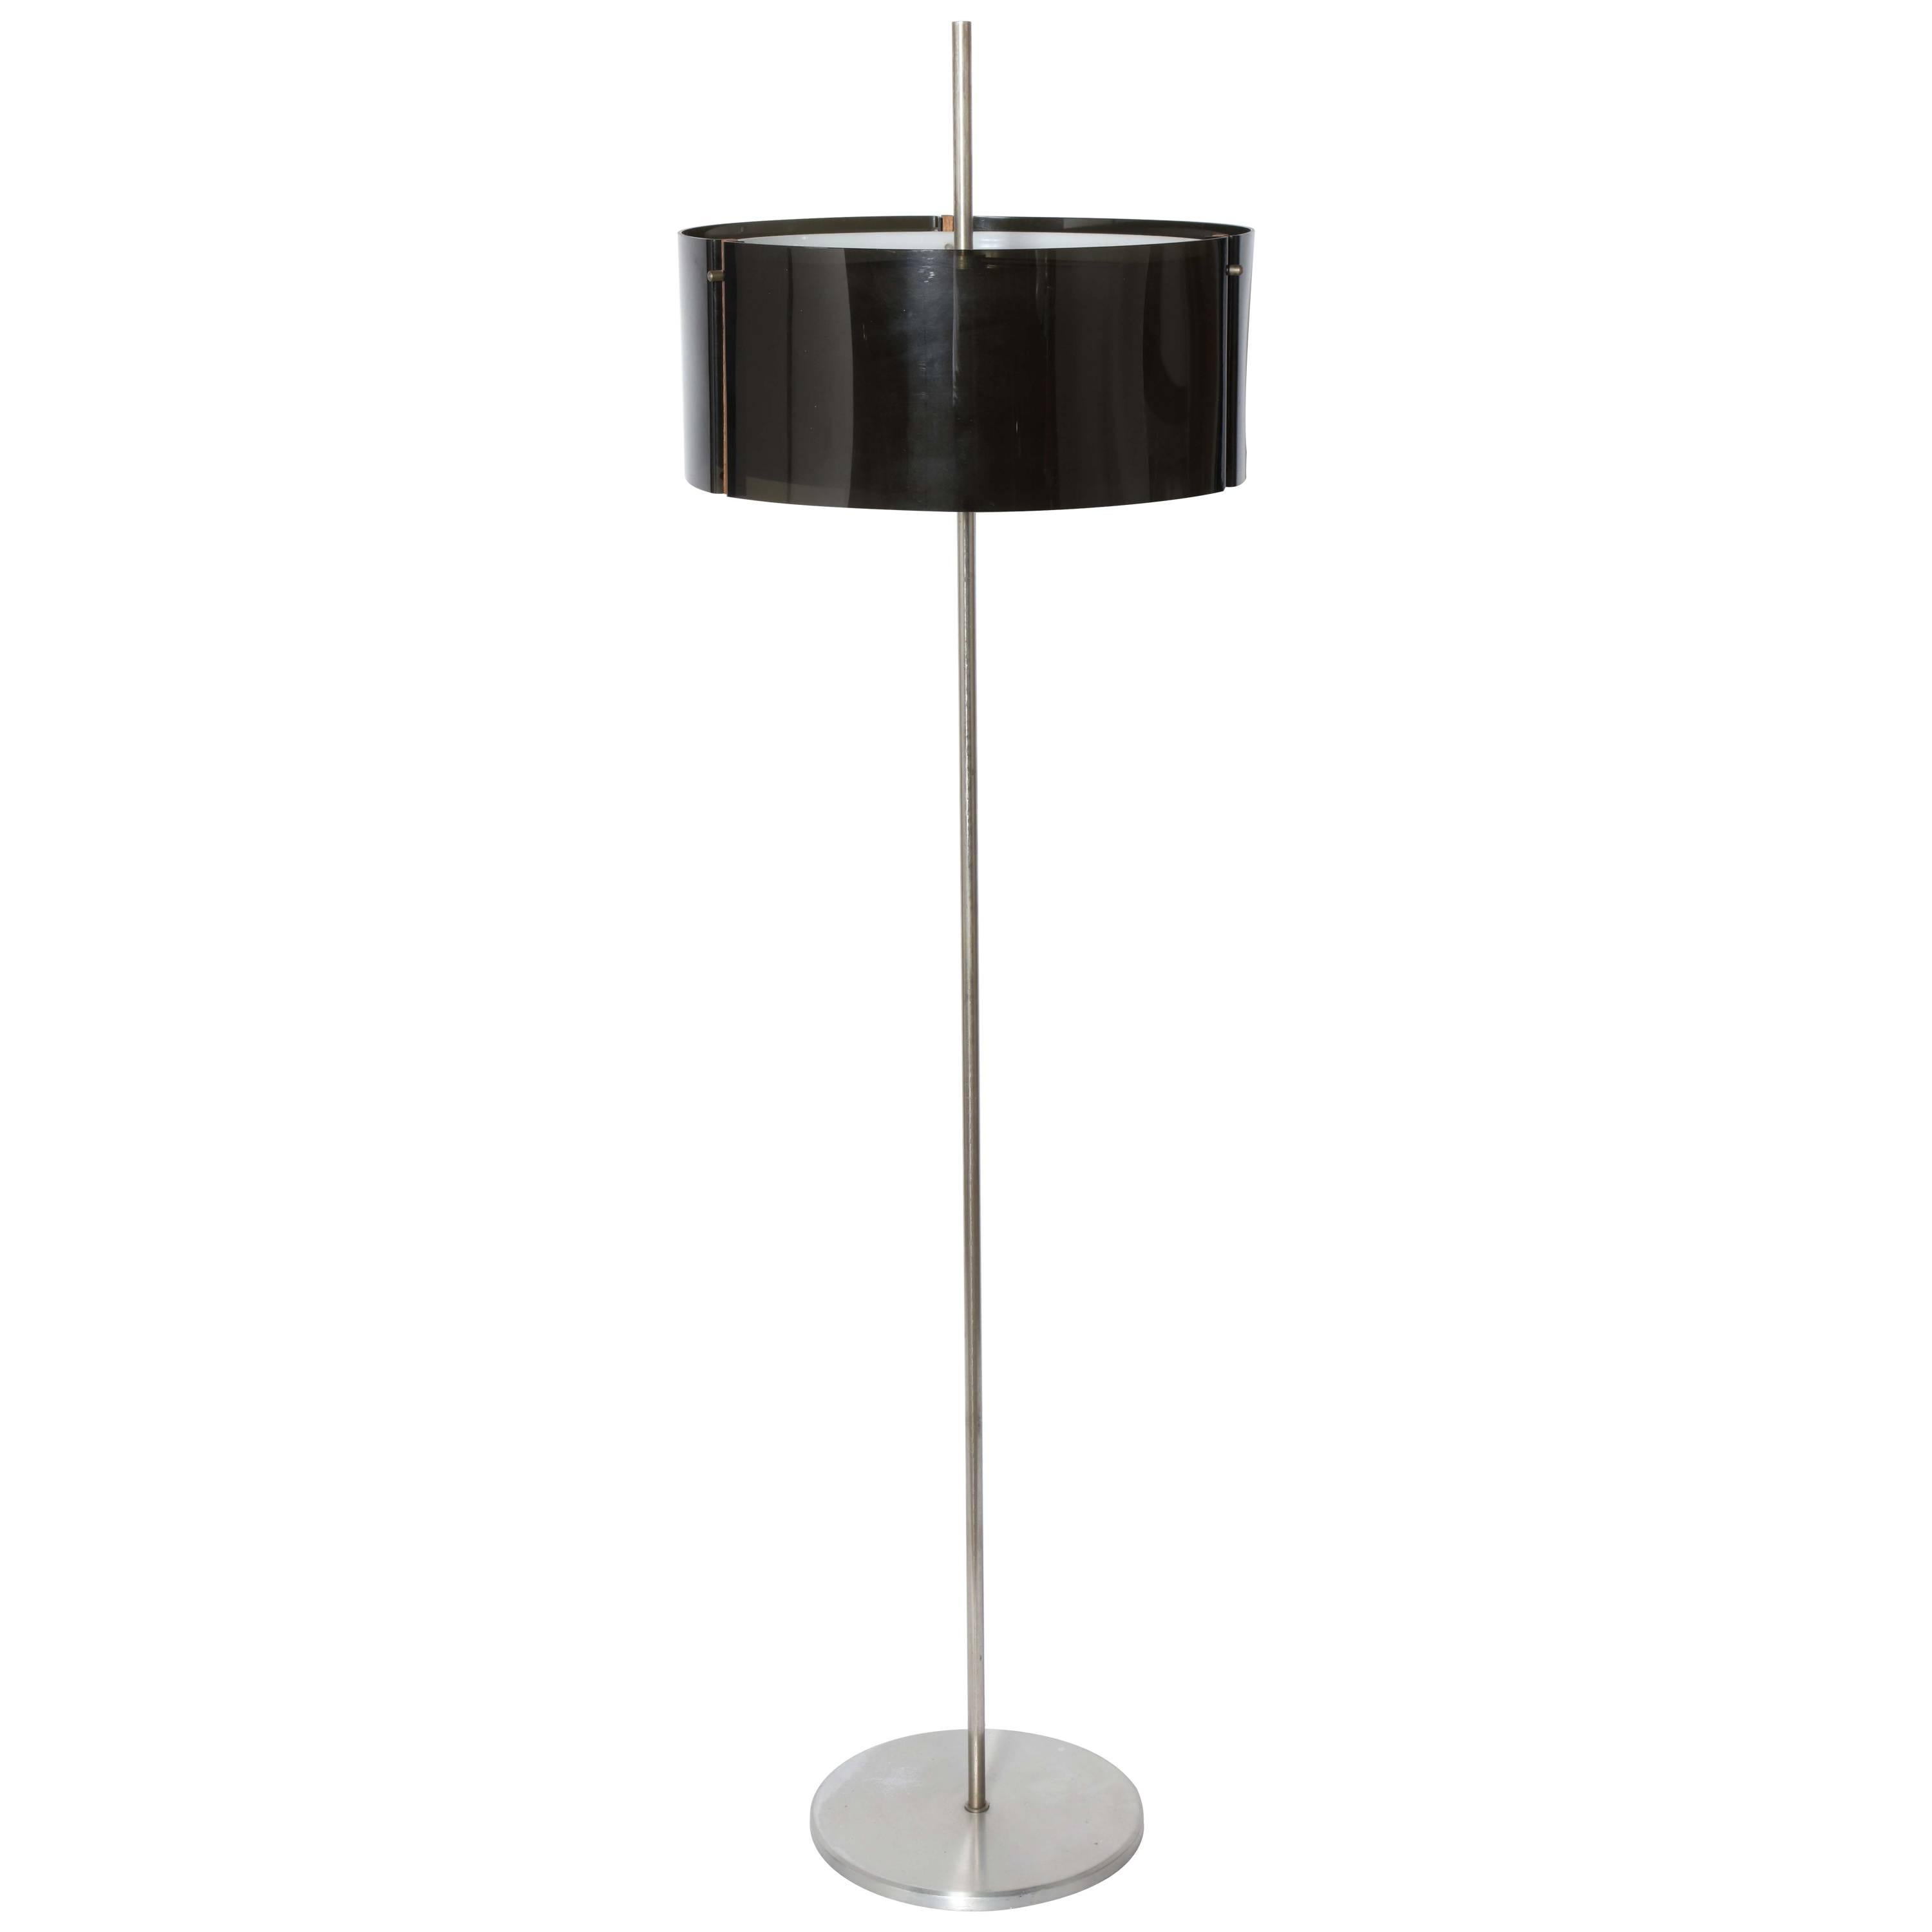 Kemp & Lauritzen Acrylux 5772 Brushed Steel Double Shade Floor Lamp. 1960s. Featuring a tubular brushed aluminium stem on 12D round base, round brushed aluminium top, outer shade in smoky grey, inner shade in off white Lucite, with three-piece